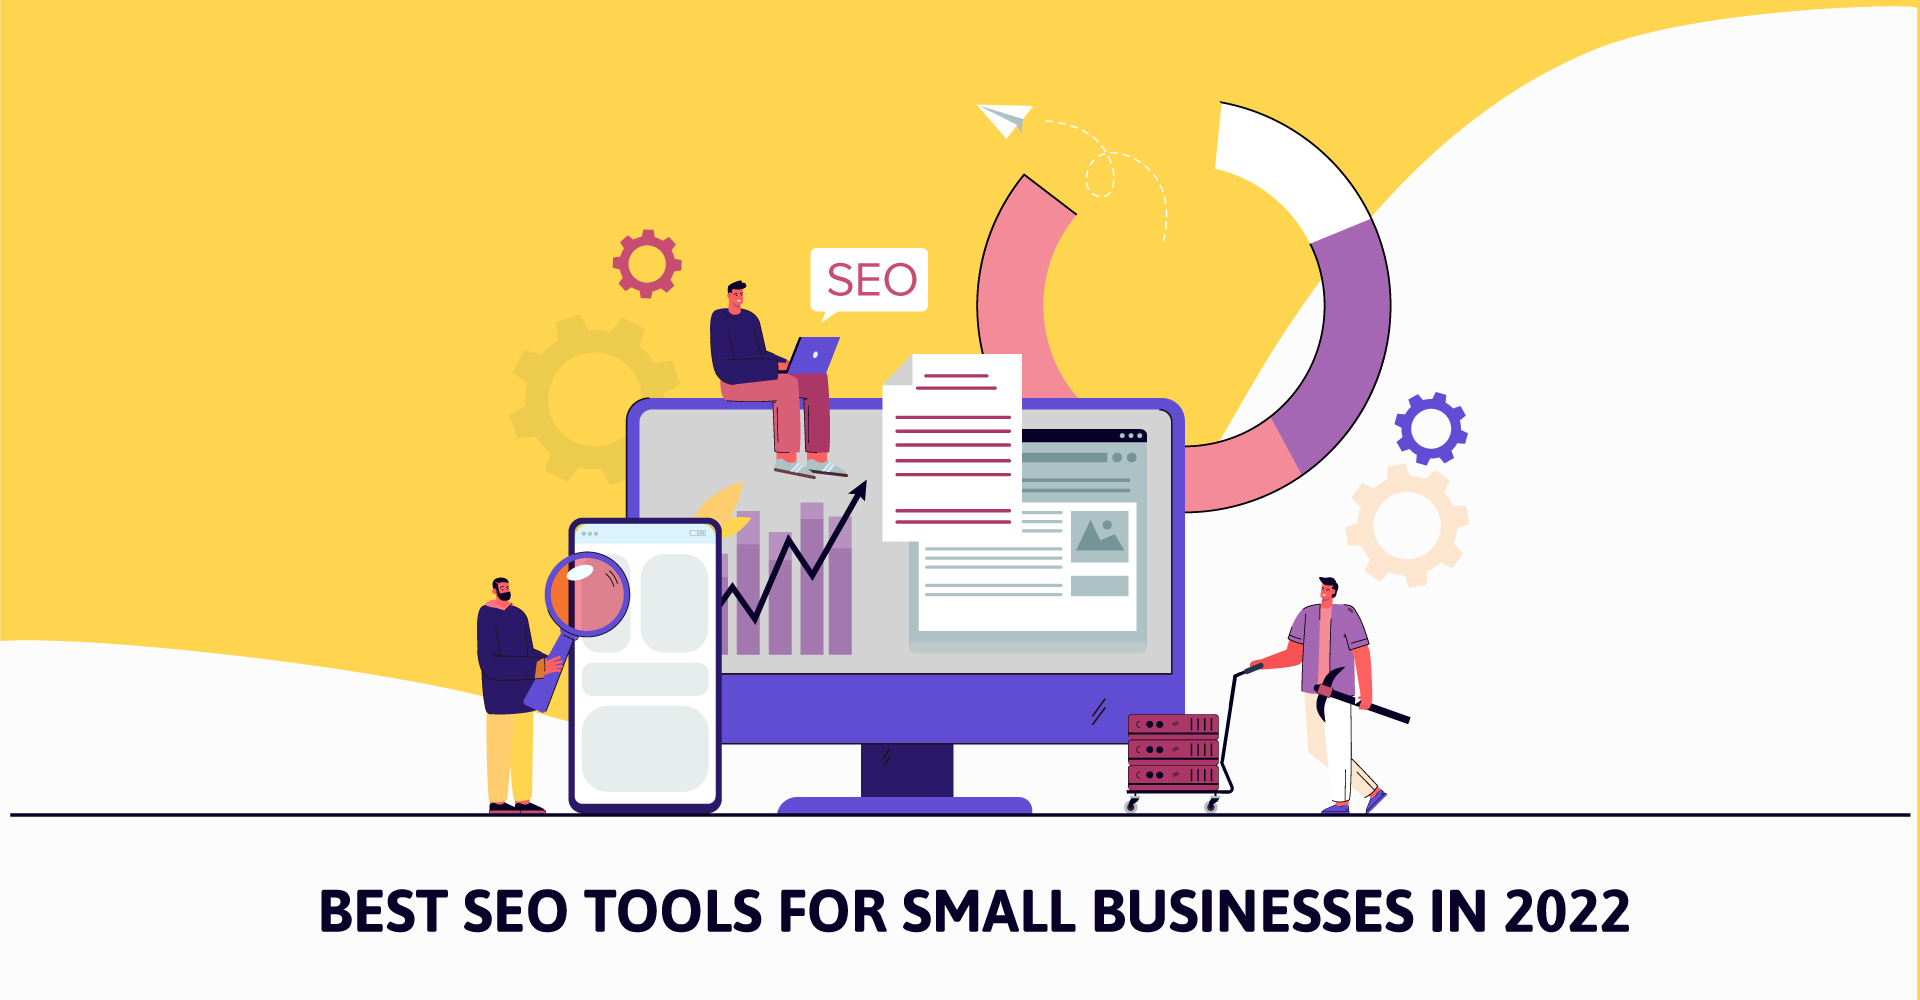 ql

BEST SEO TOOLS FOR SMALL BUSINESSES IN 2022